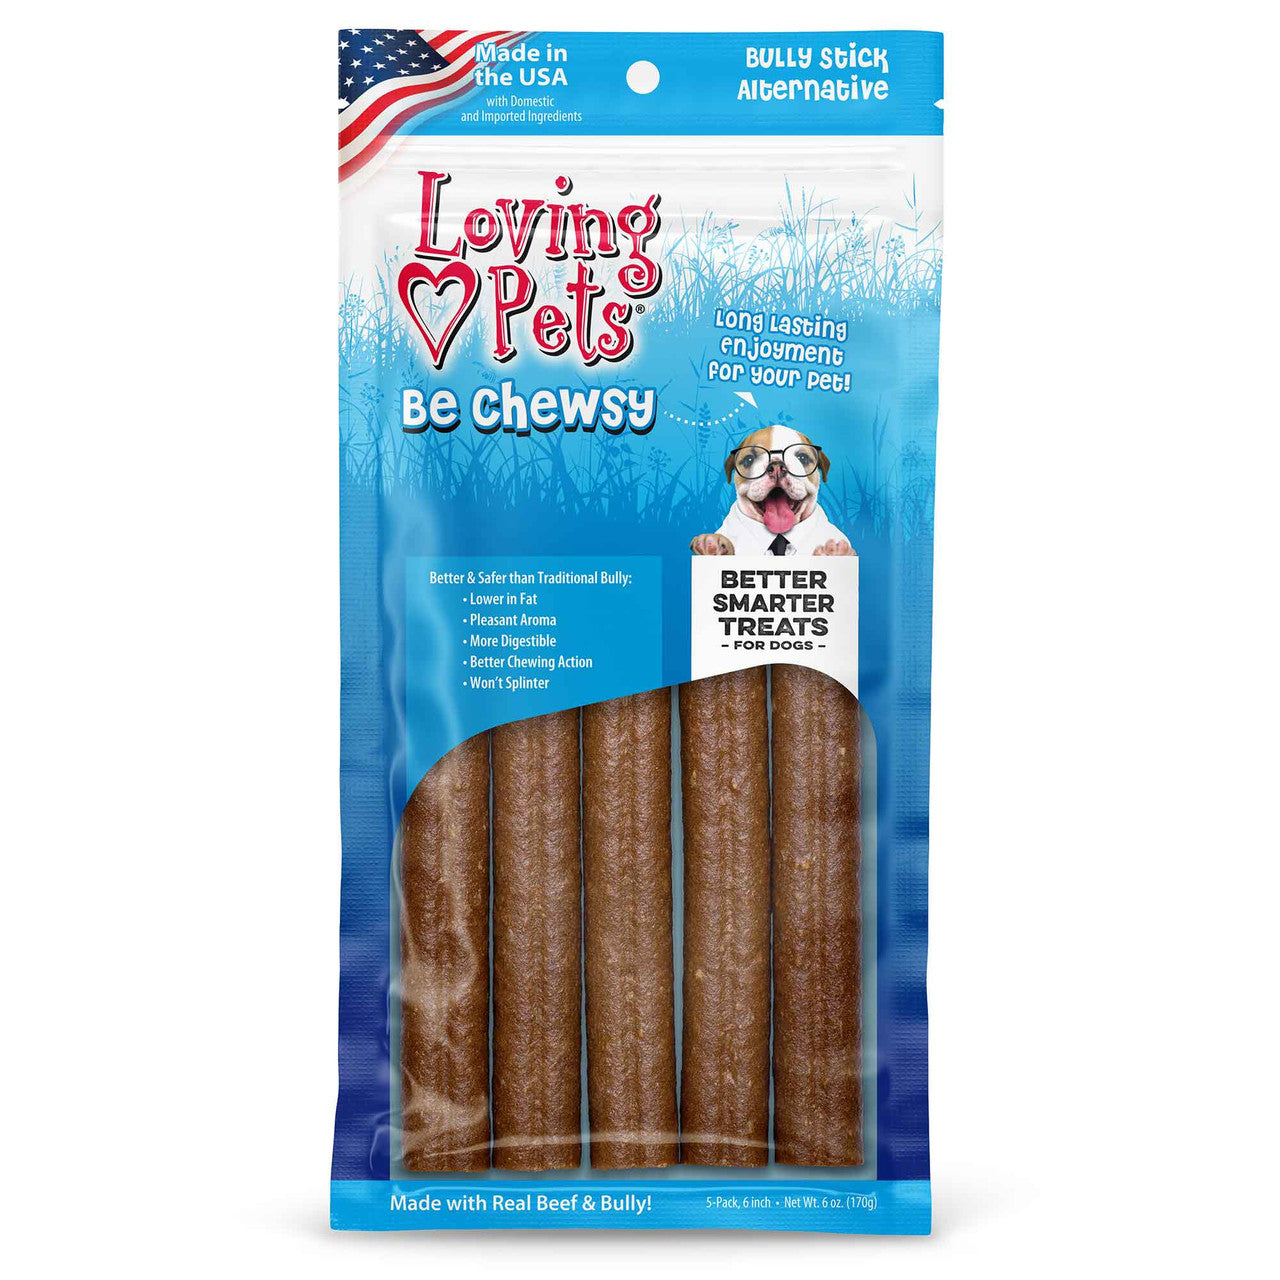 Be Chewsy Bully Stick Alternative Better Smarter Chews For Dogs